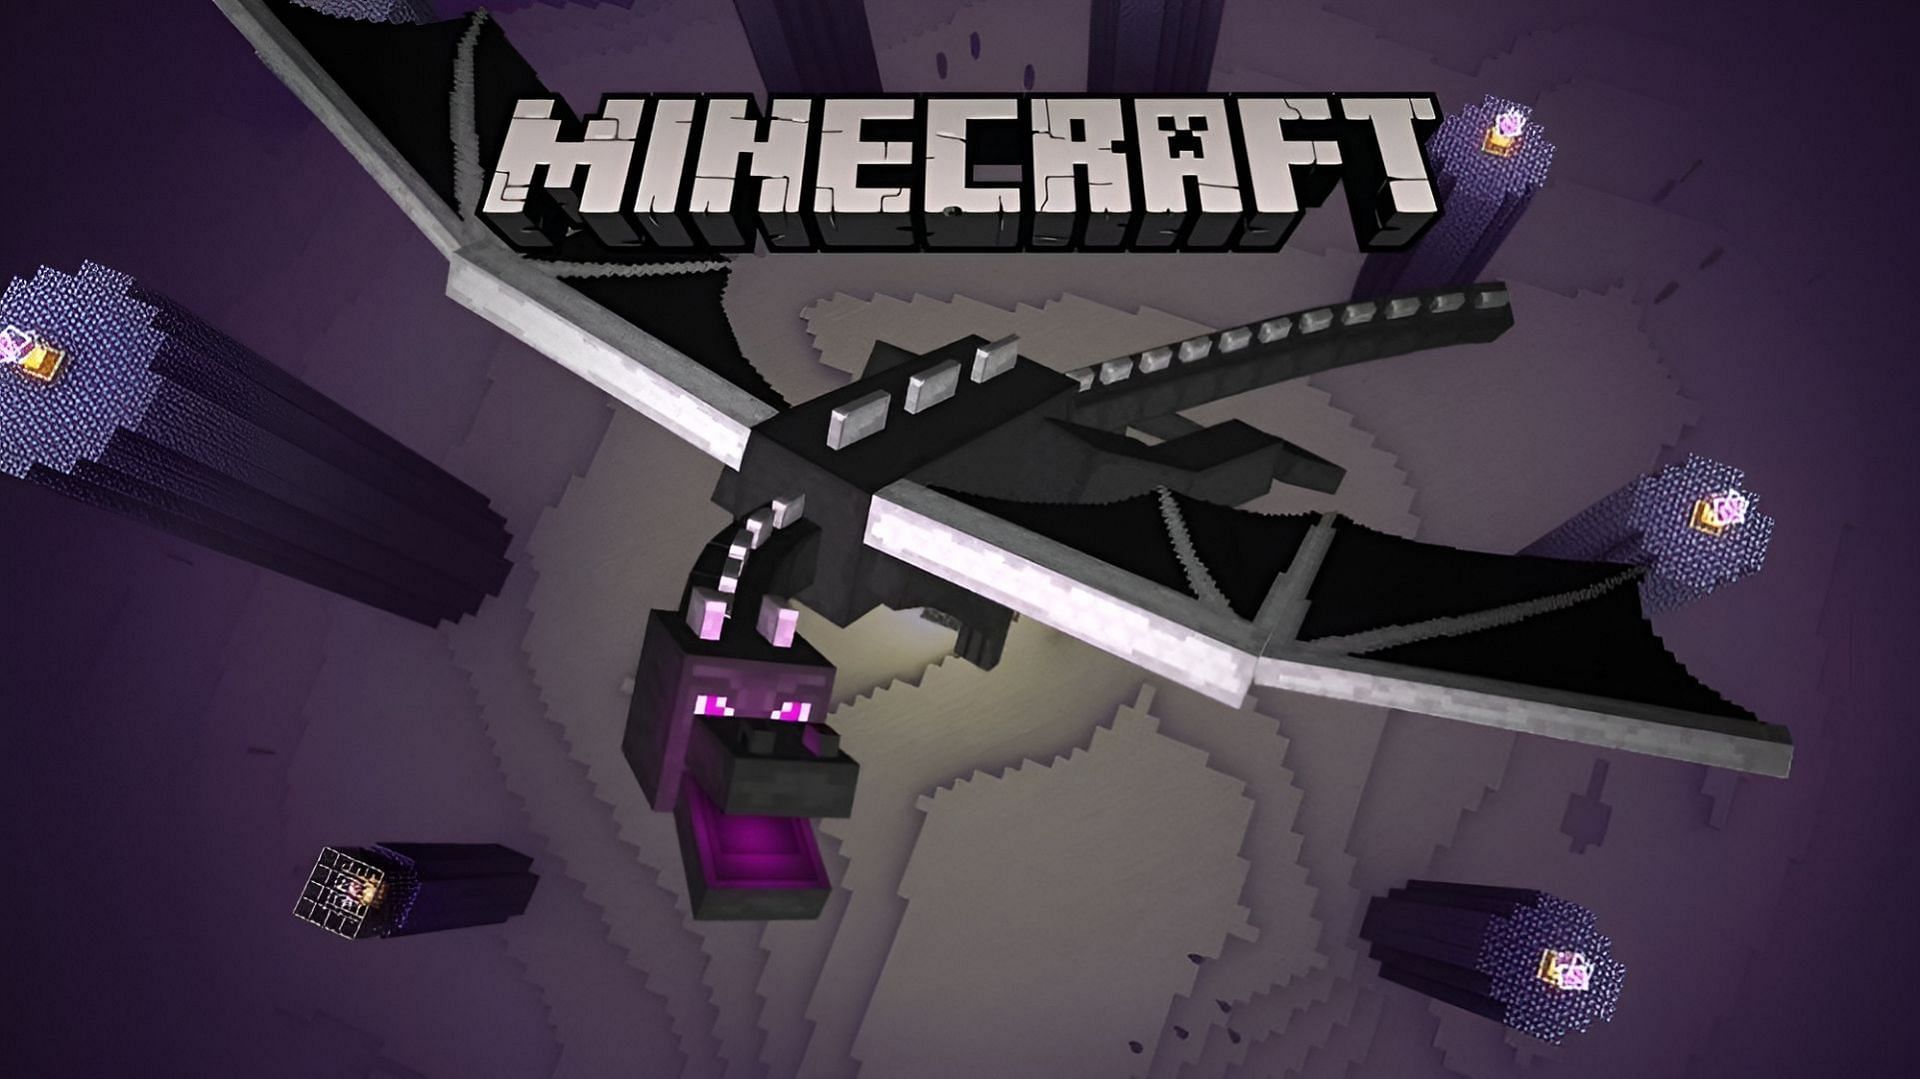 Defeating the Ender Dragon is considered one primary objective in Minecraft (Image via Mojang)